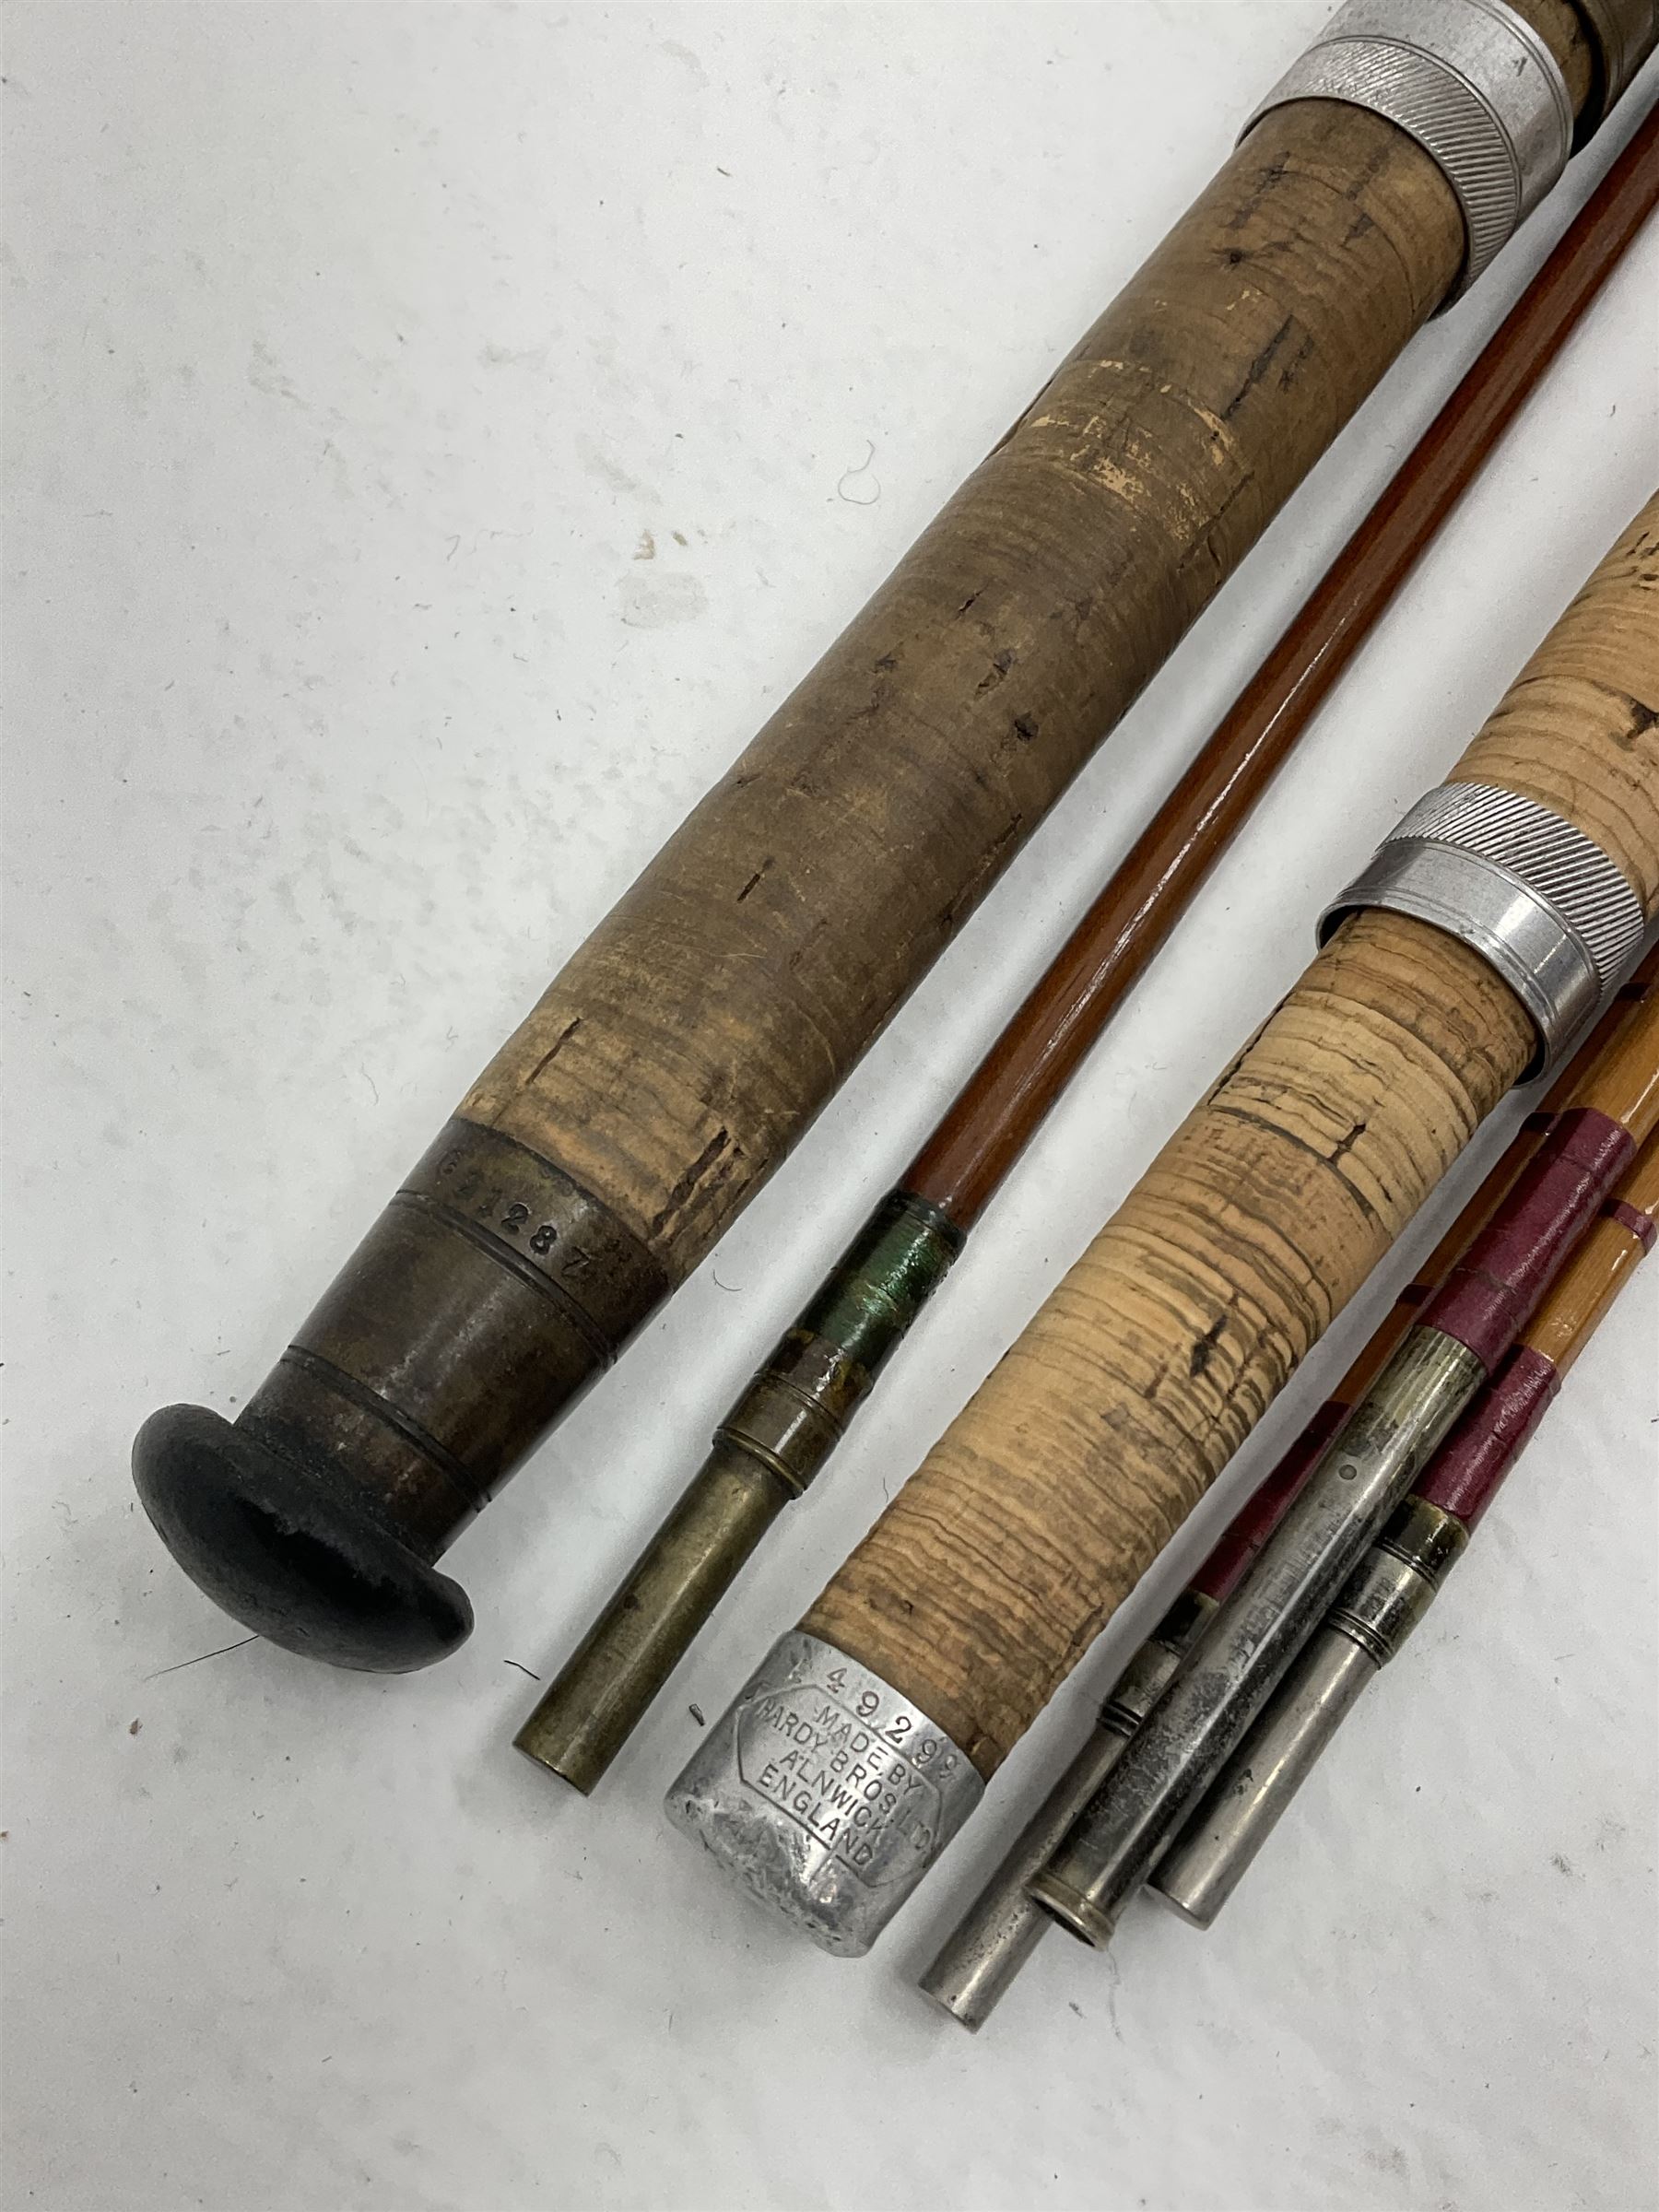 Vintage four piece split cane fly fishing rod, butt cap marked